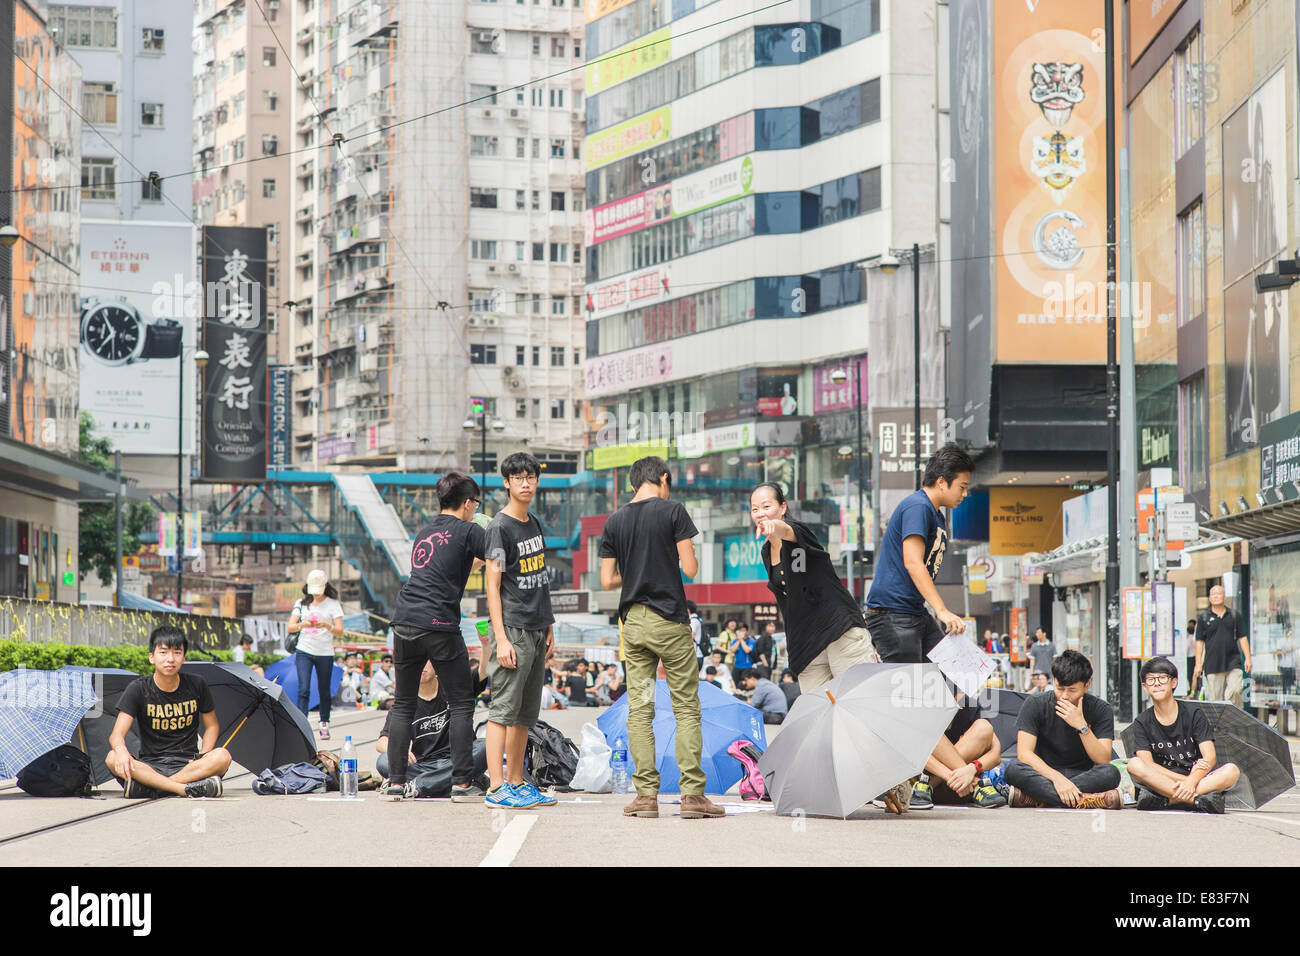 Hong Kong, 29 September 2014 - people are occupying in Causeway Bay and Mongkok, for a democratic election. Credit:  kmt rf/Alamy Live News Stock Photo